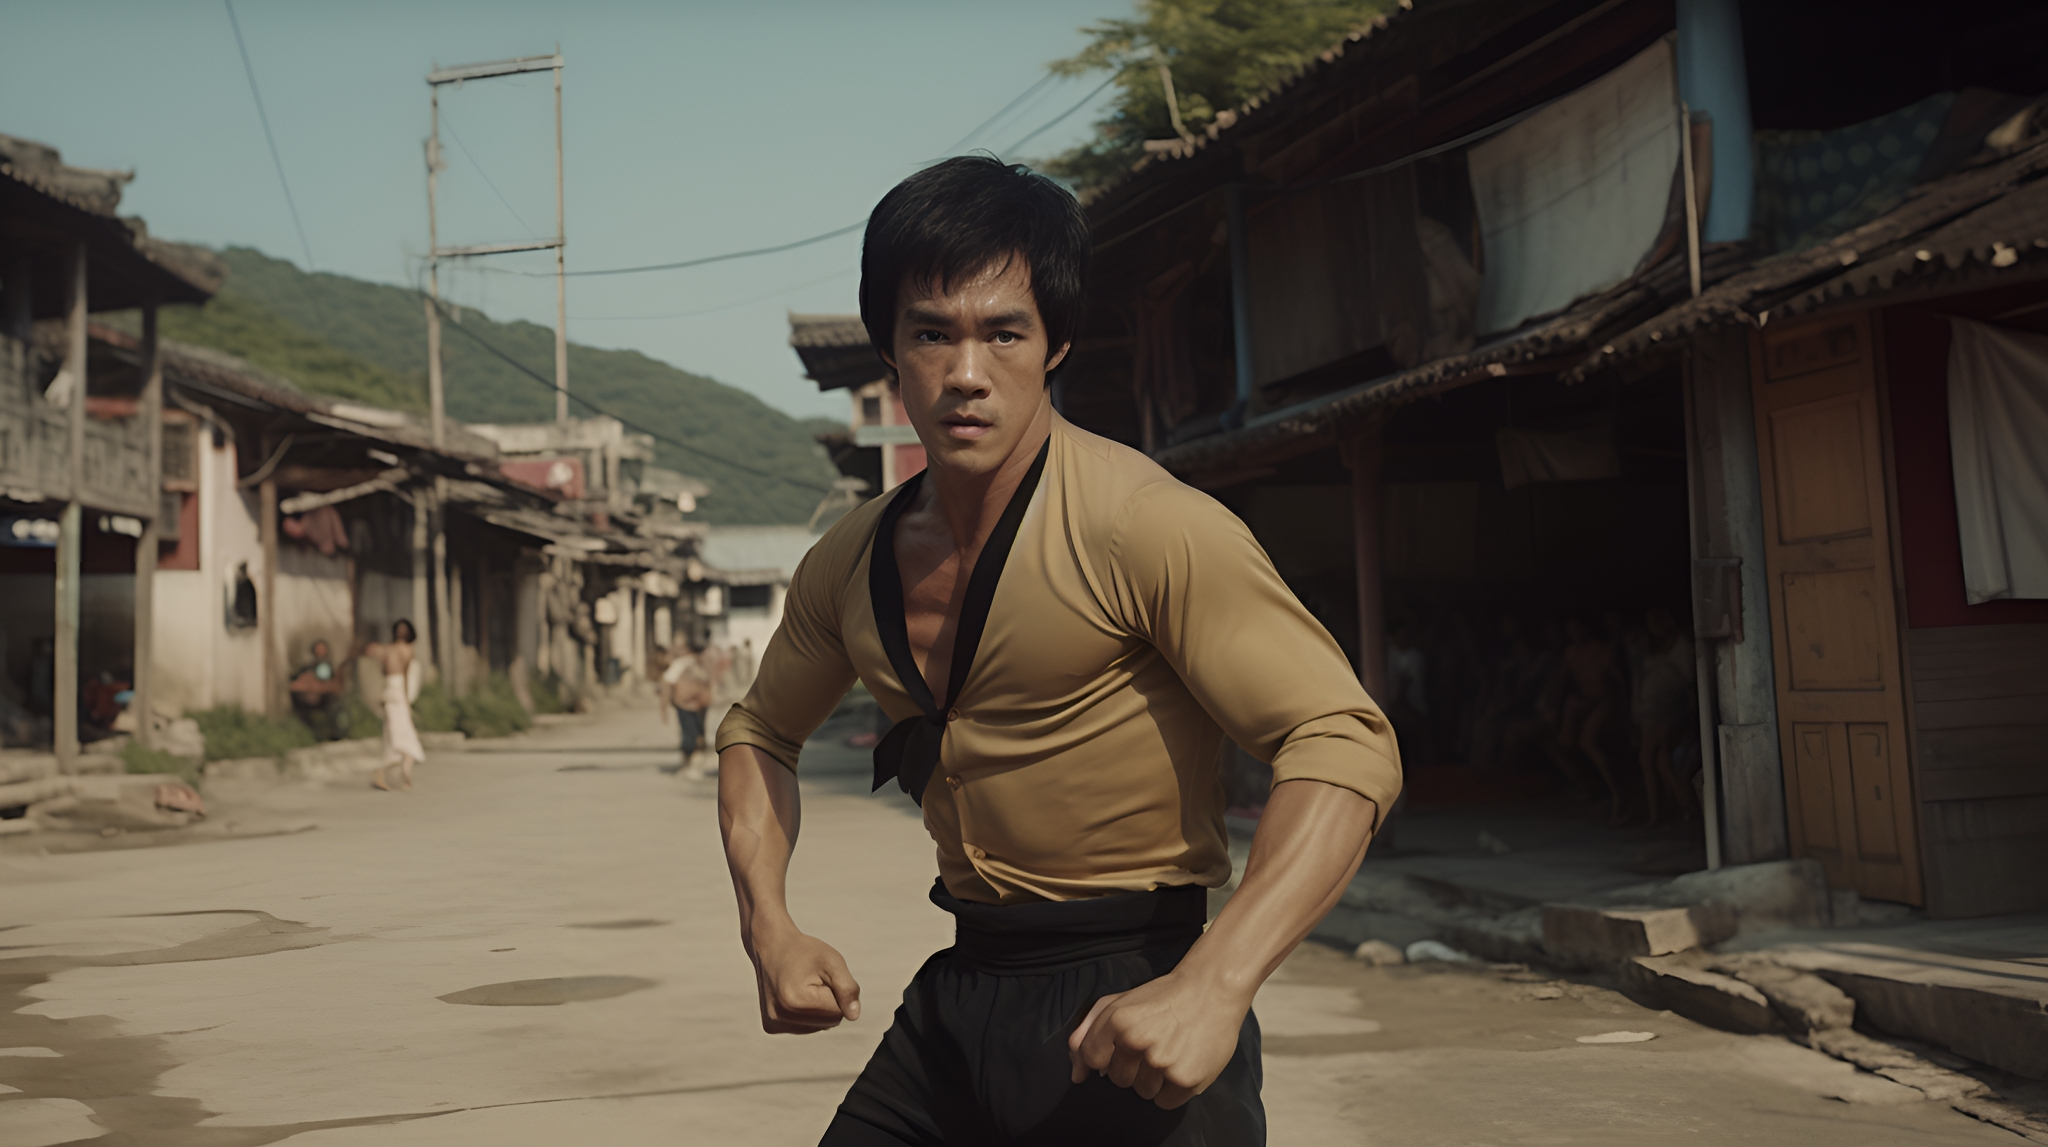 Cinematic still of Bruce Lee in motion, wearing a gold shirt and black pants, running through a traditional Chinese village street